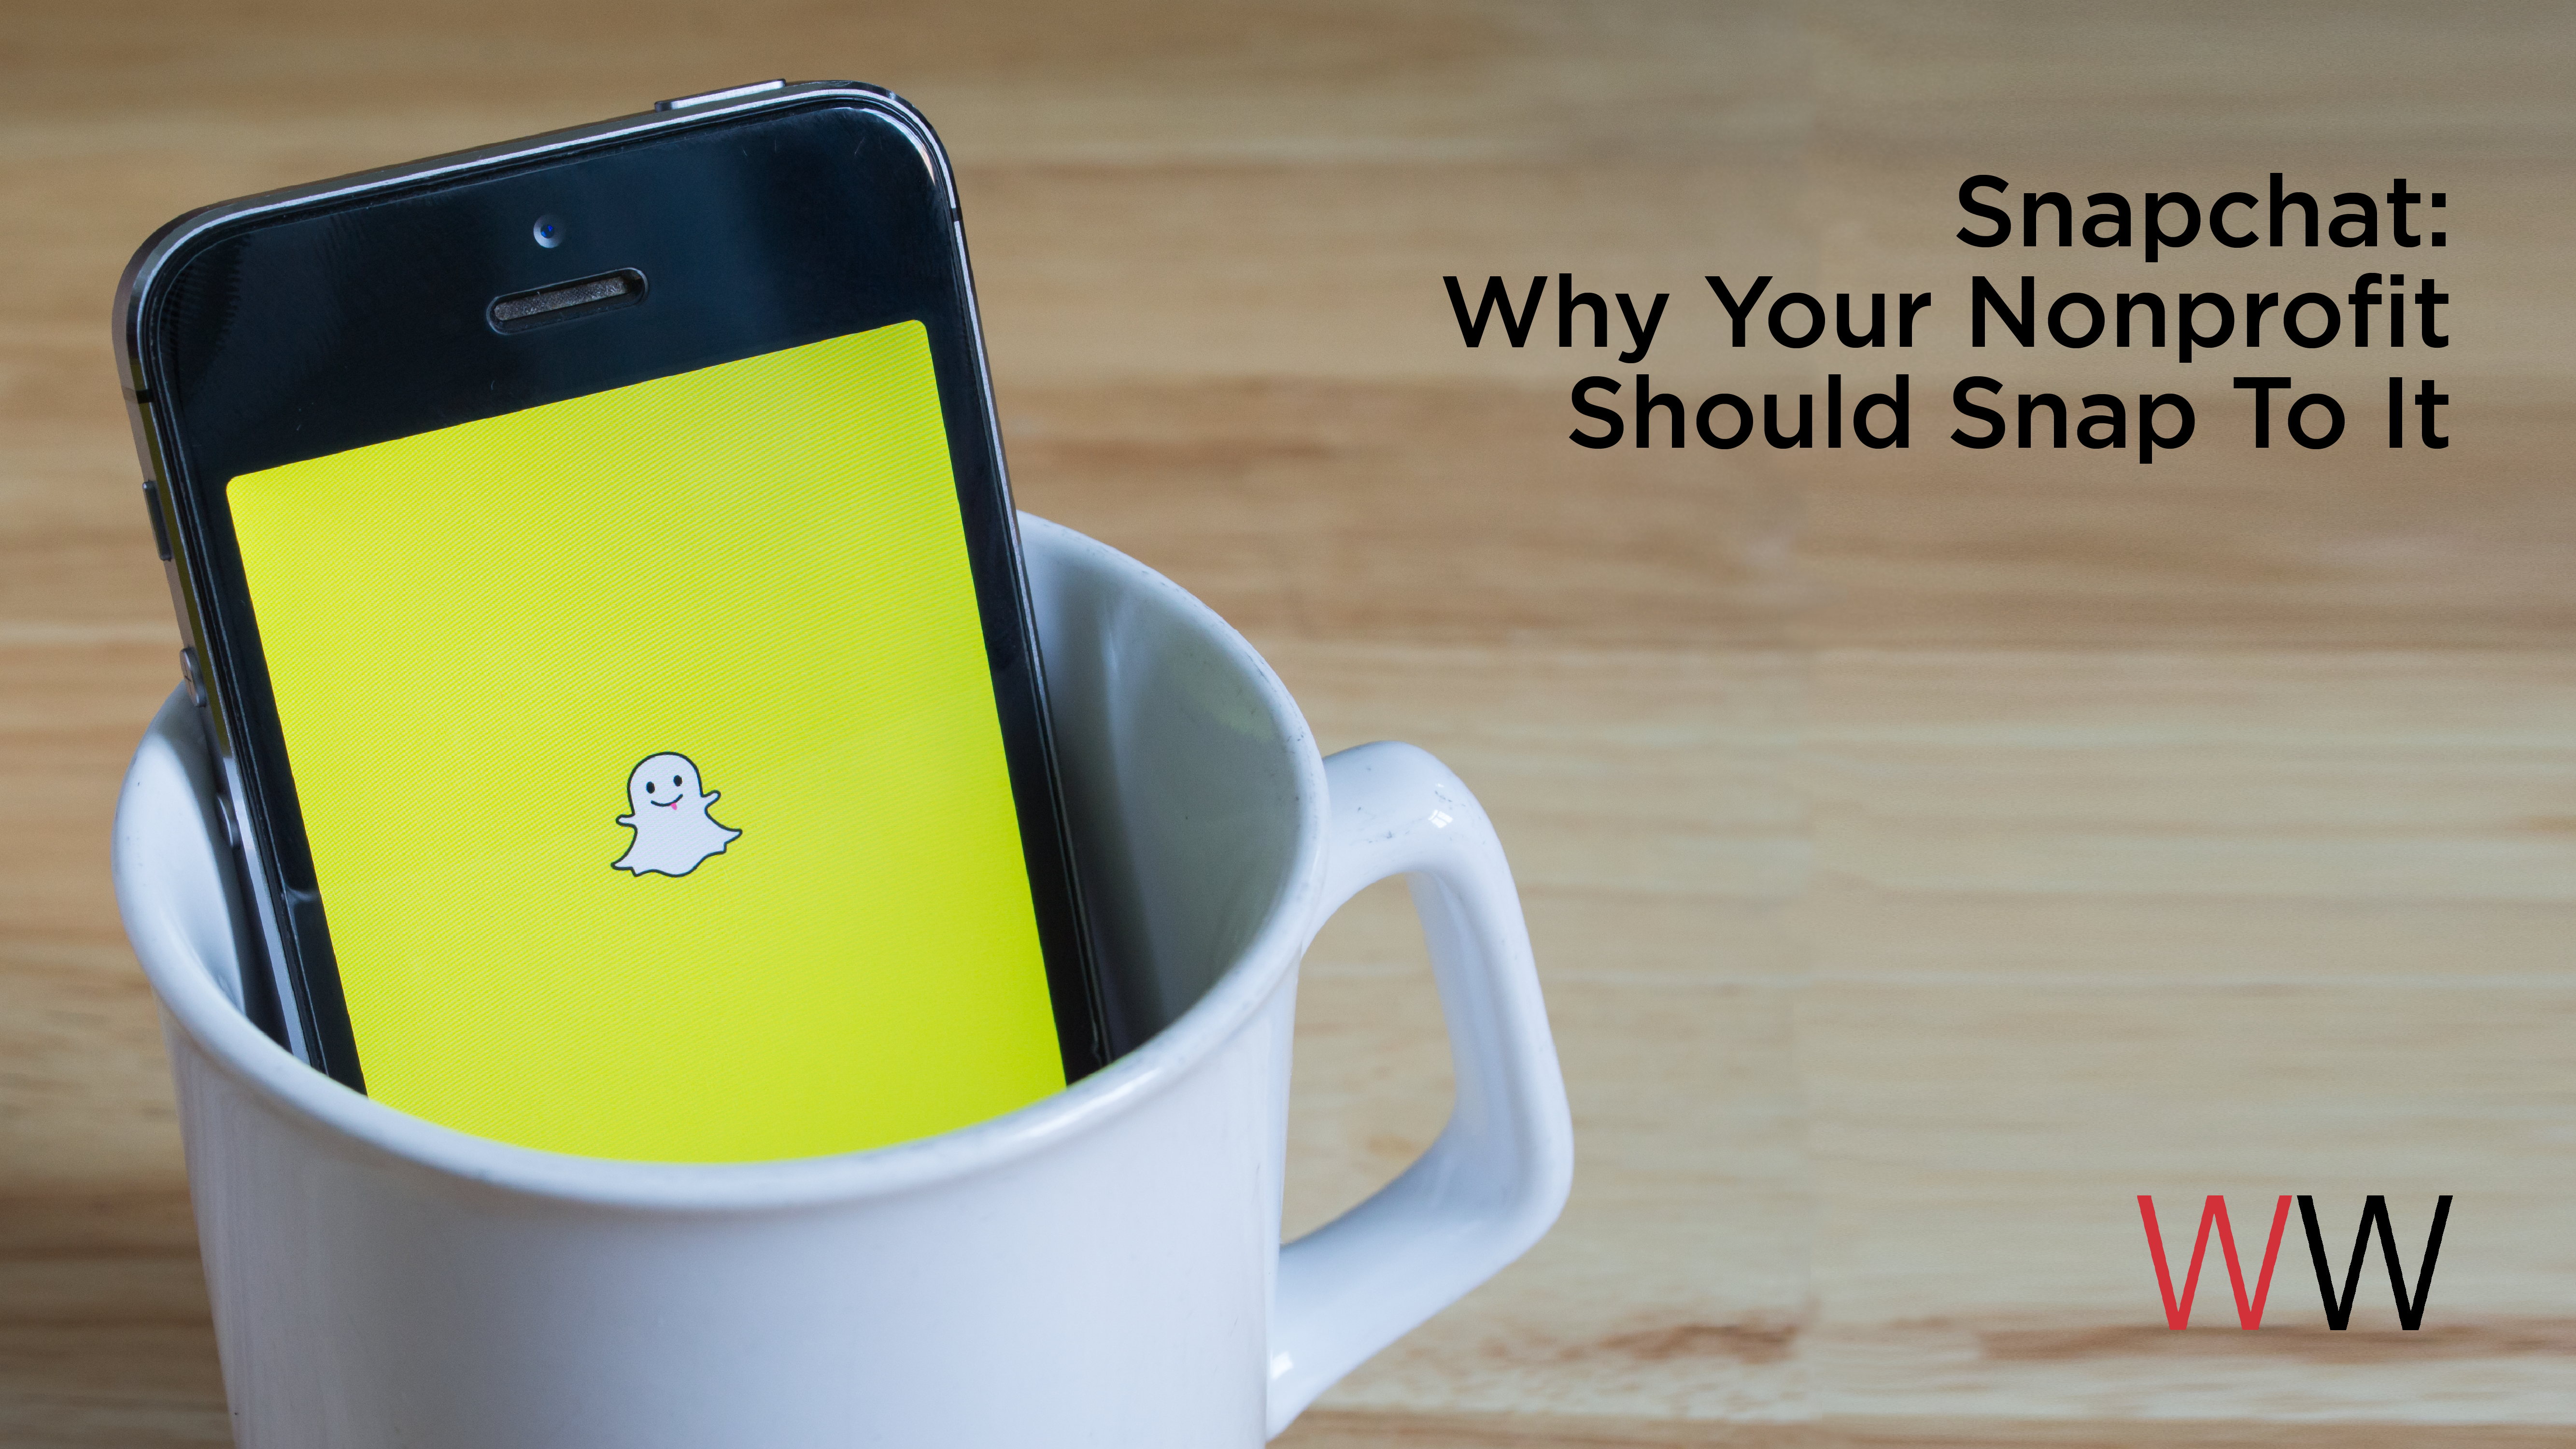 Snapchat: Why Your Nonprofit Should Snap To It